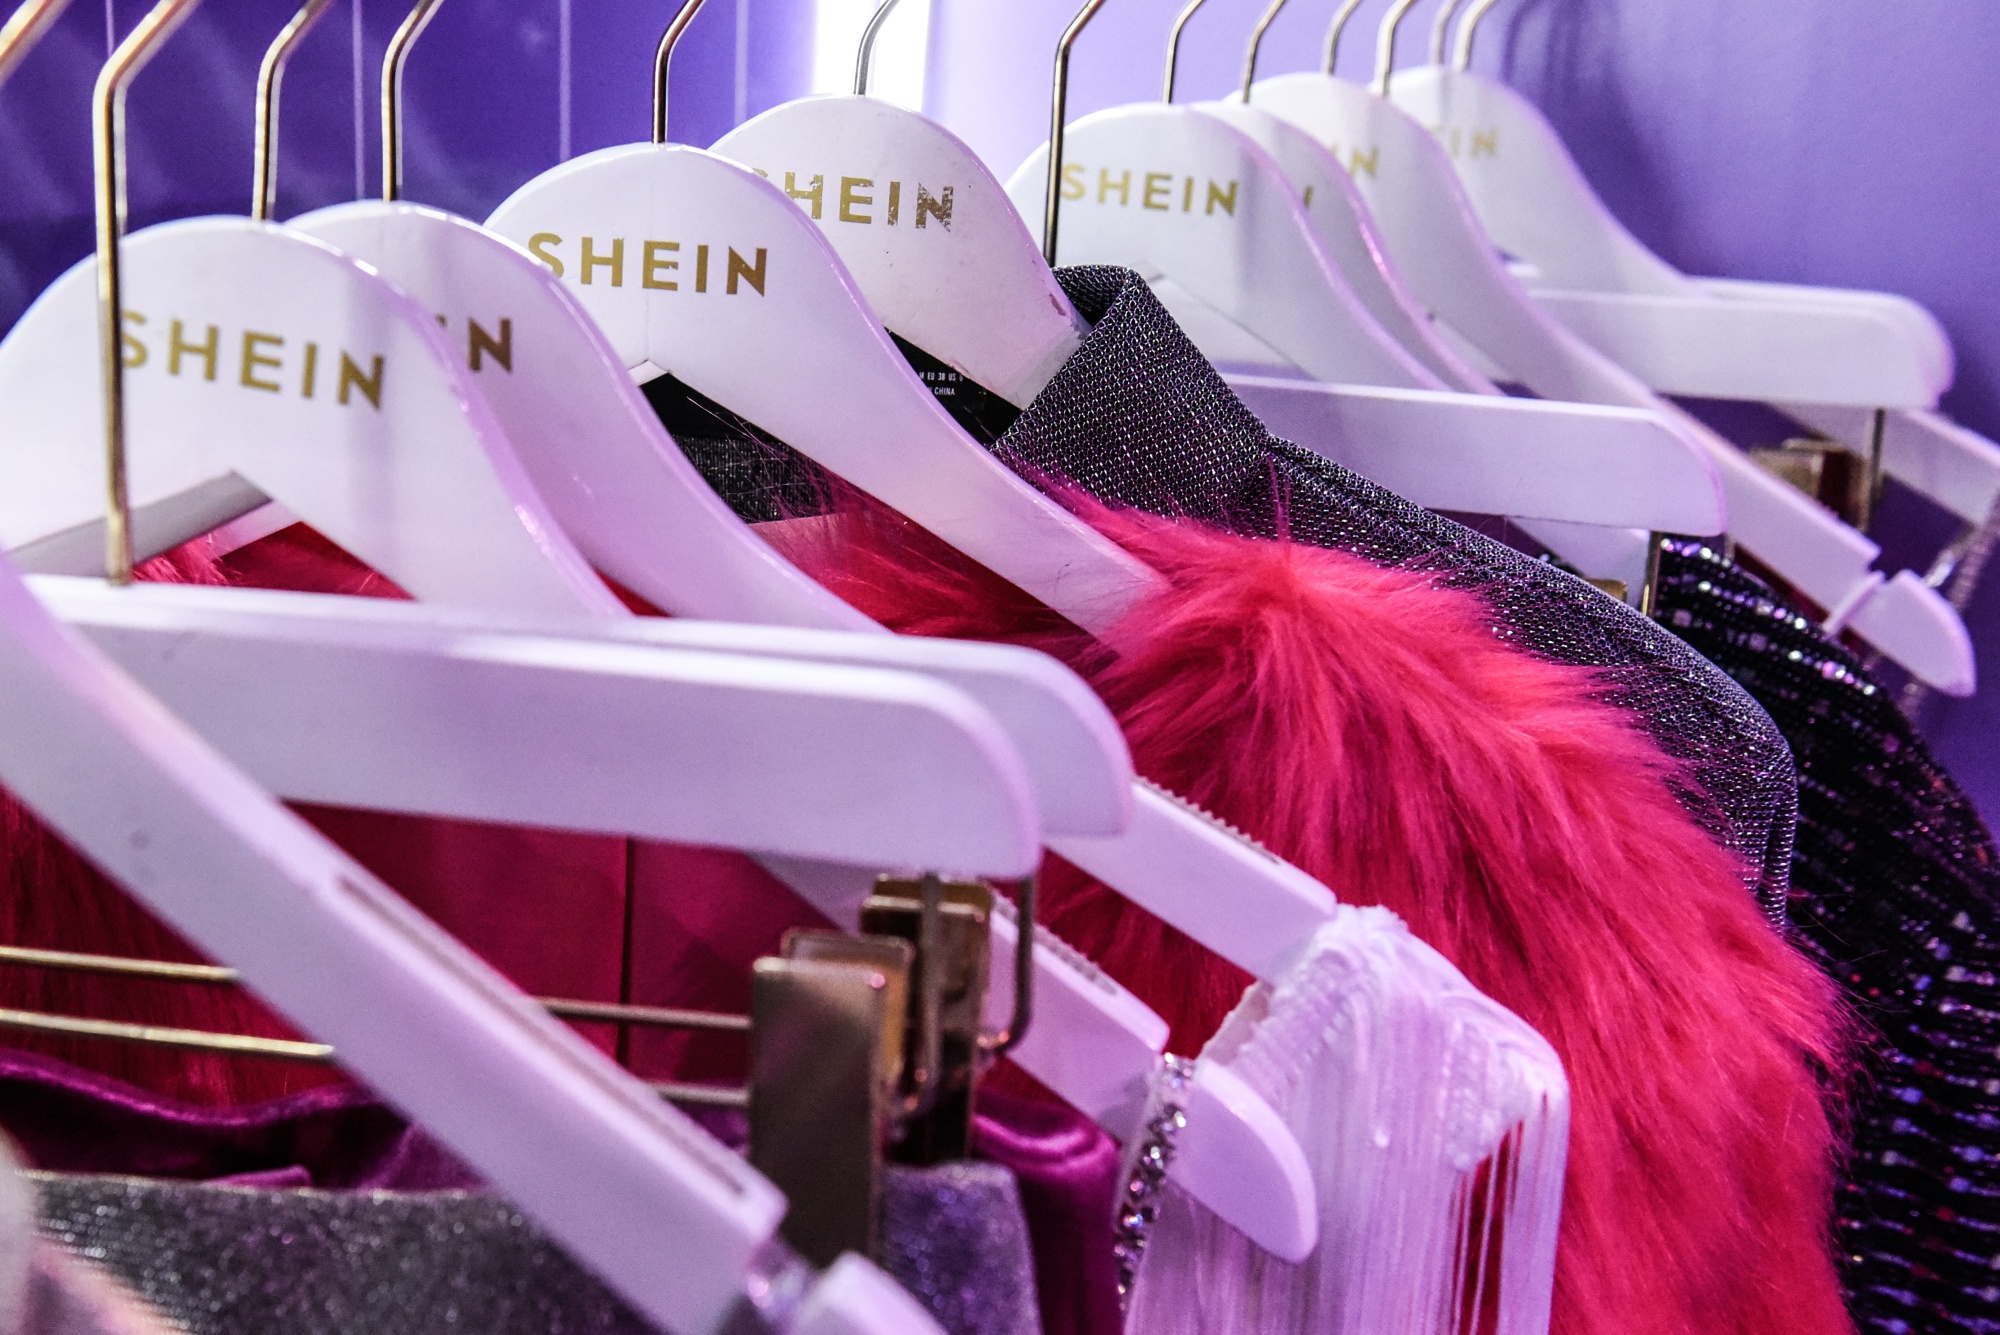 Shein Pop-Ups Continue in 2023: Locations, Schedule and Products – WWD